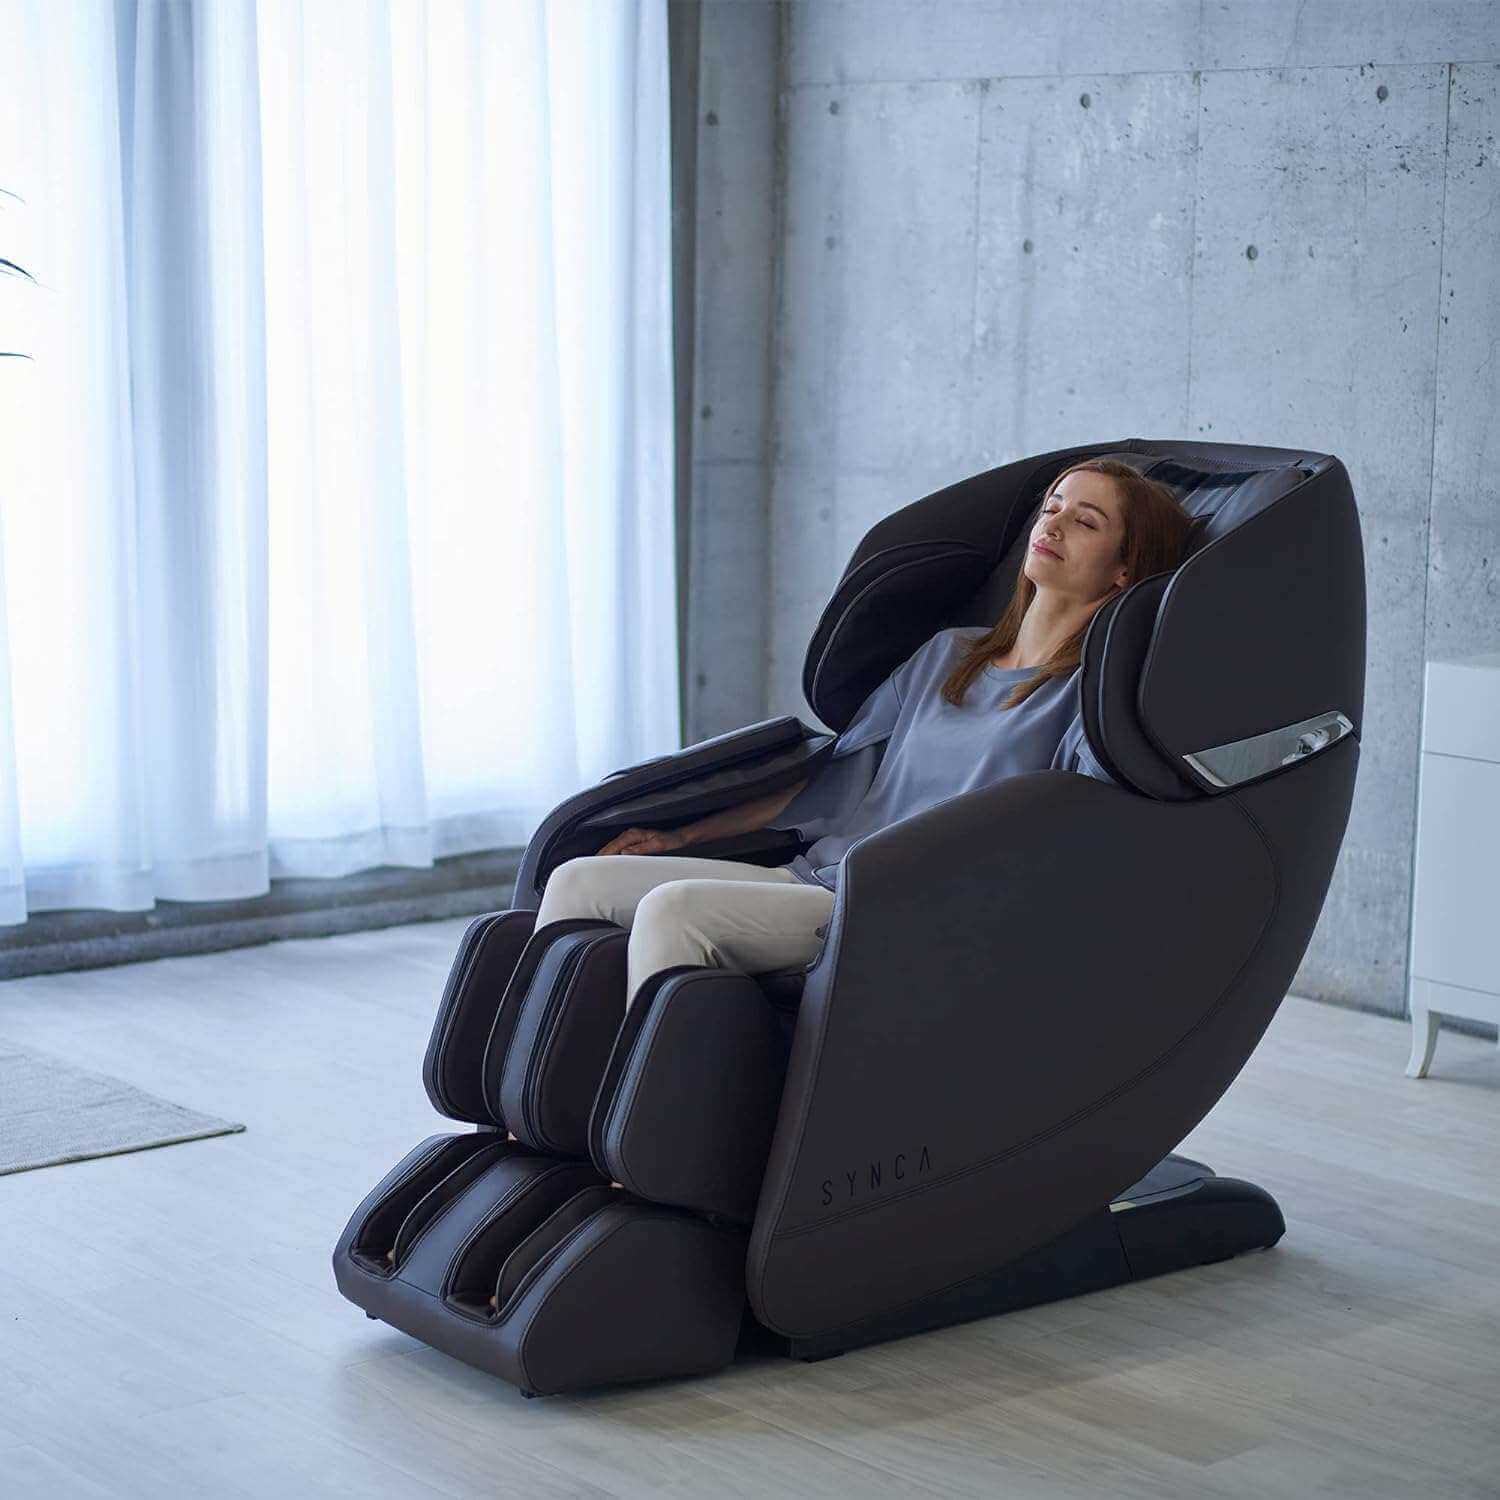 Synca Wellness Hisho - SL Track Heated Deluxe Zero Gravity Massage Chair - Electric Massaging Chairs